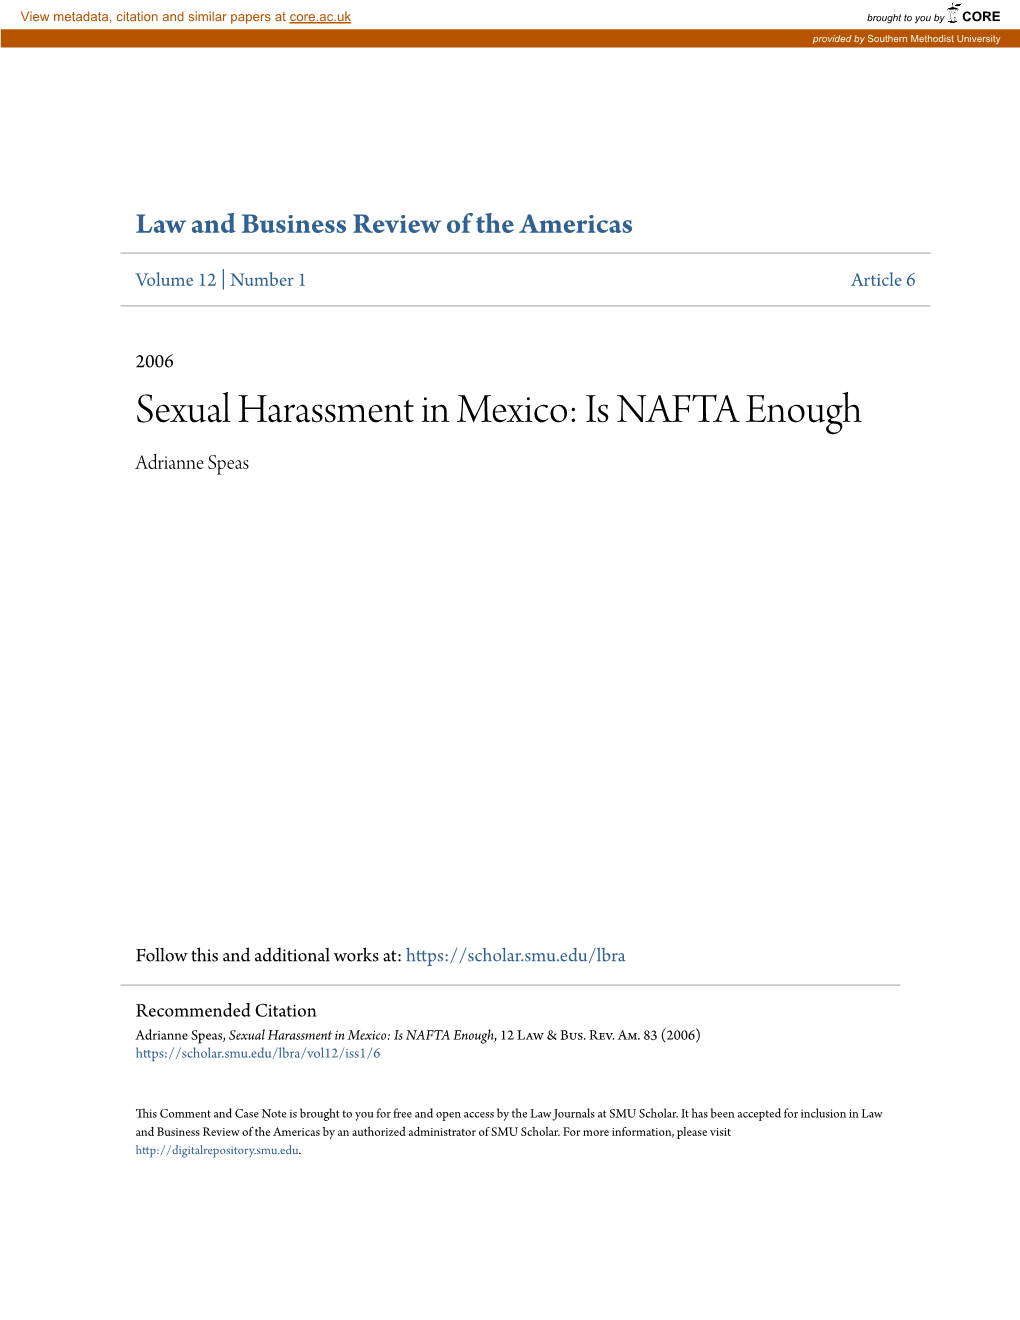 Sexual Harassment in Mexico: Is NAFTA Enough Adrianne Speas